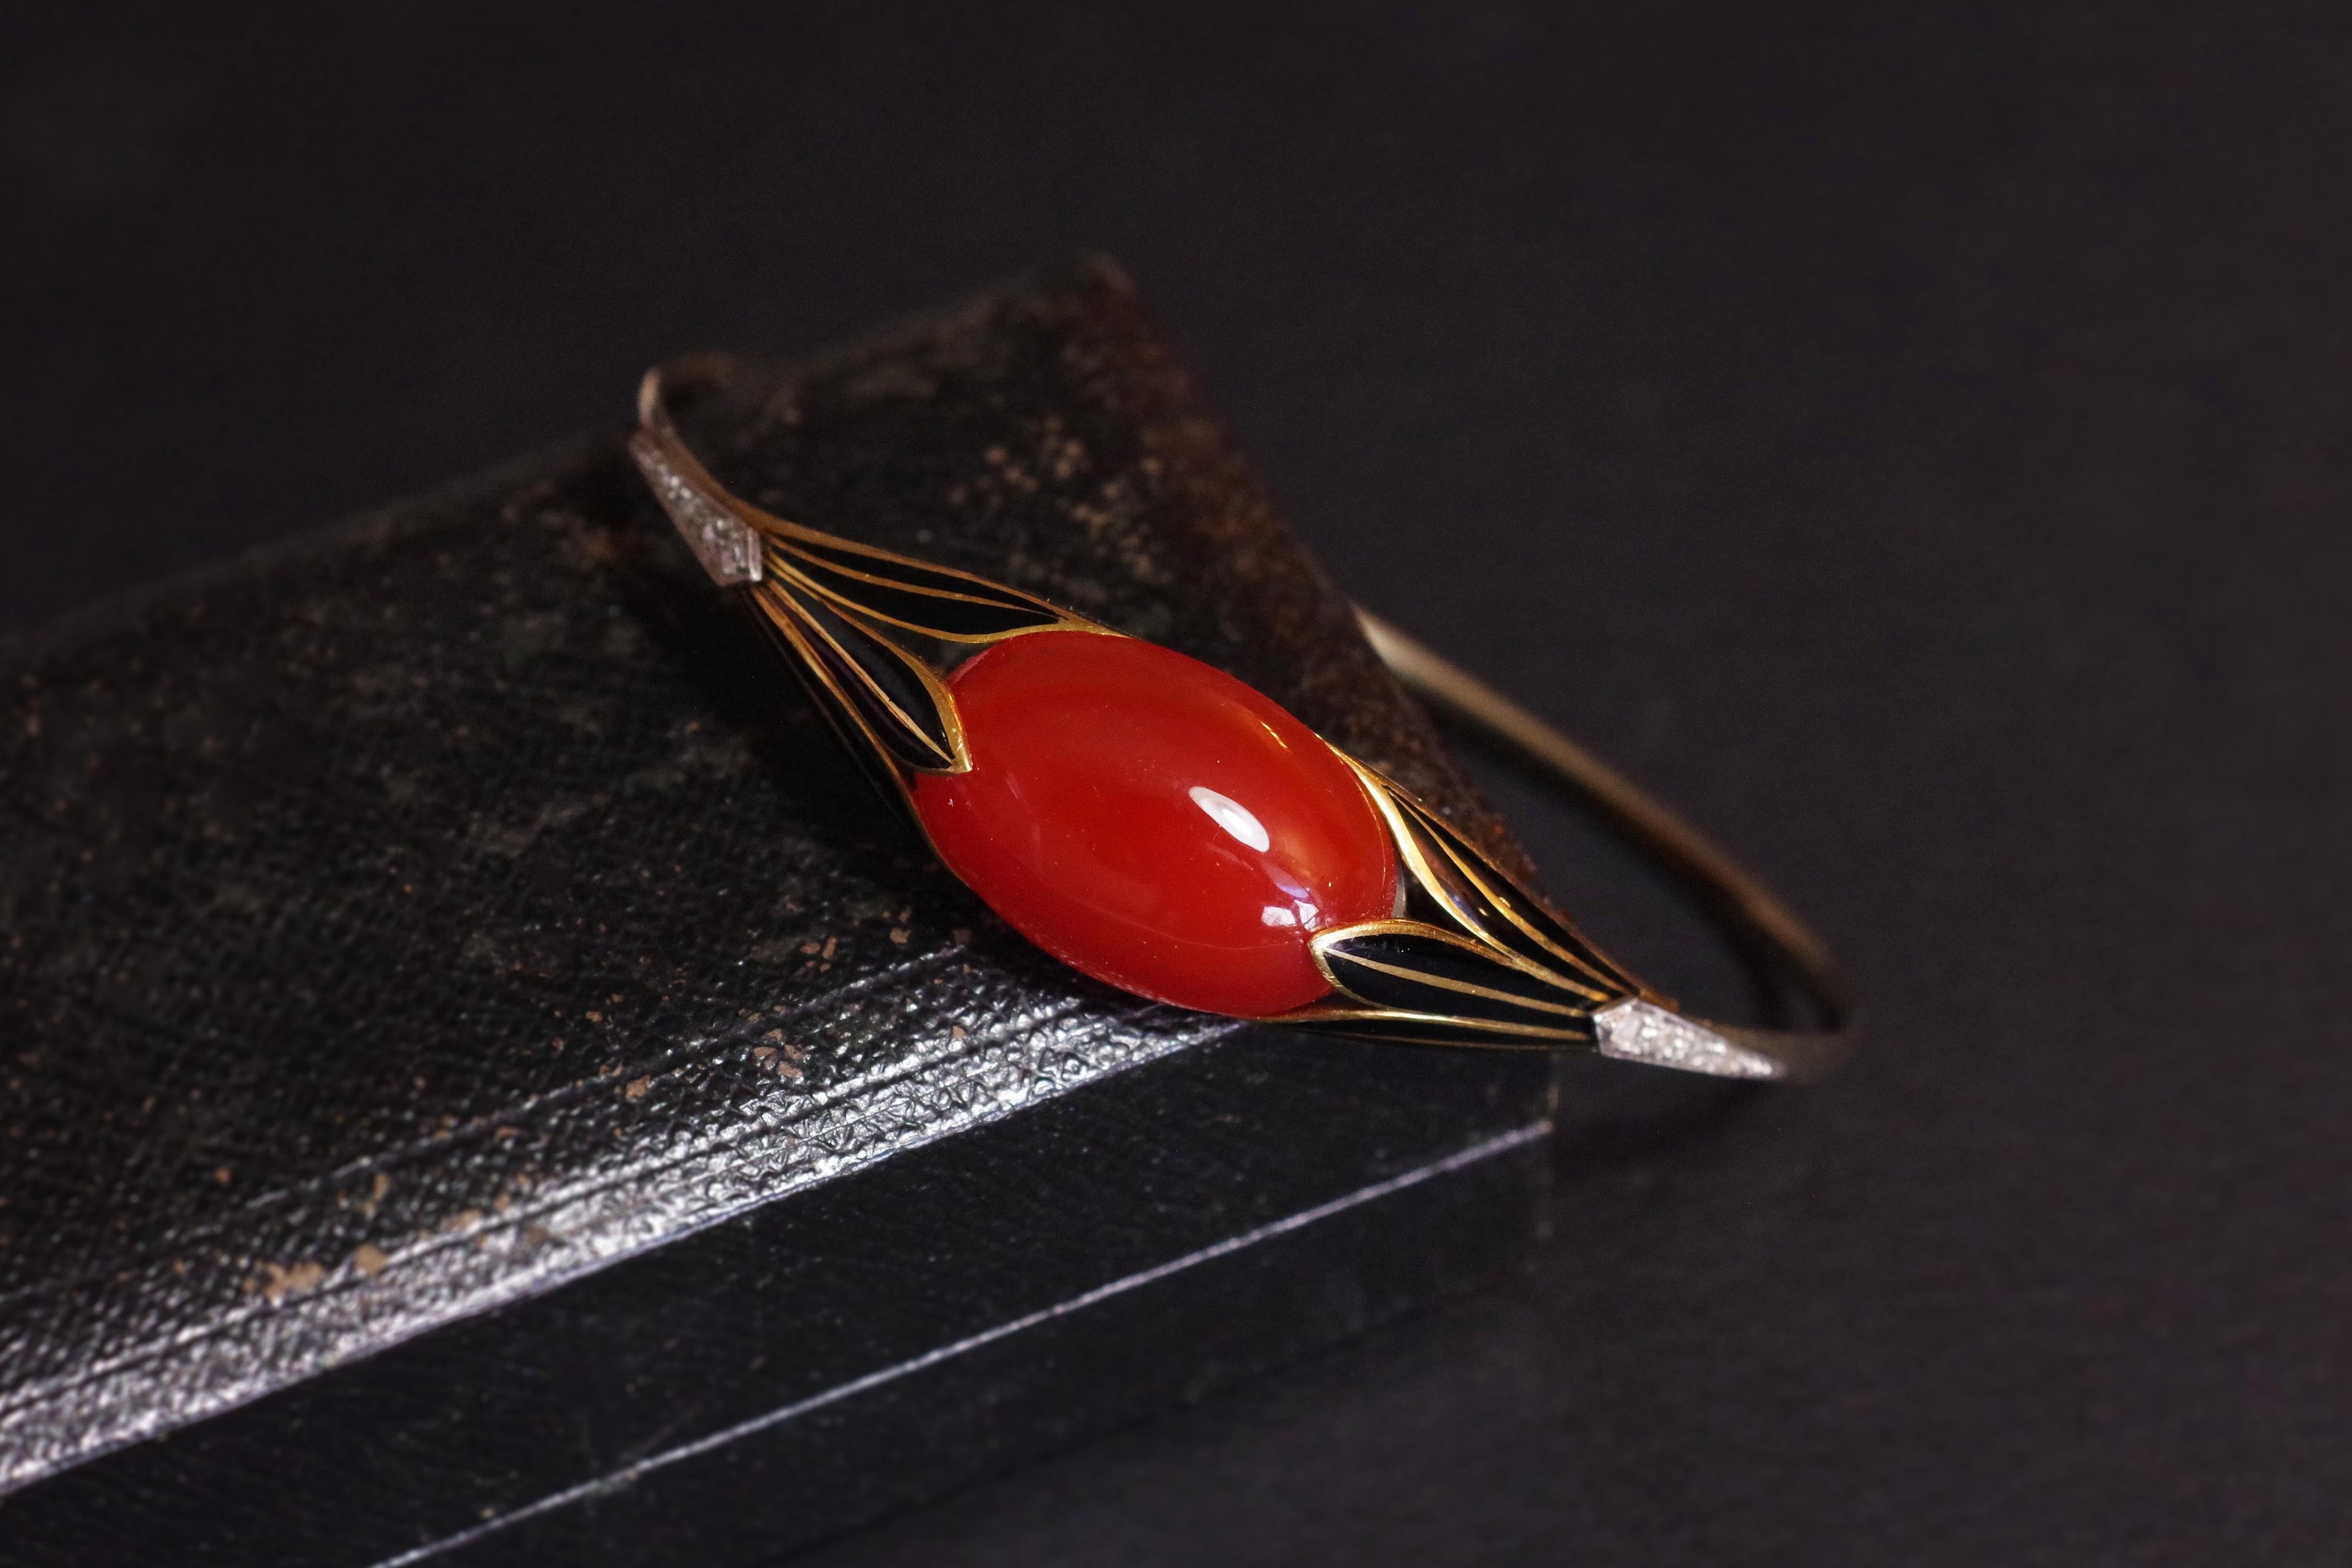 Art Deco Egyptomania bracelet in 18 karats white gold. This rare bangle bracelet is adorned with a large carnelian cabochon in the center, held on each side by a yellow gold palmette and enameled in black. The palmettes are set with eight rose-cut